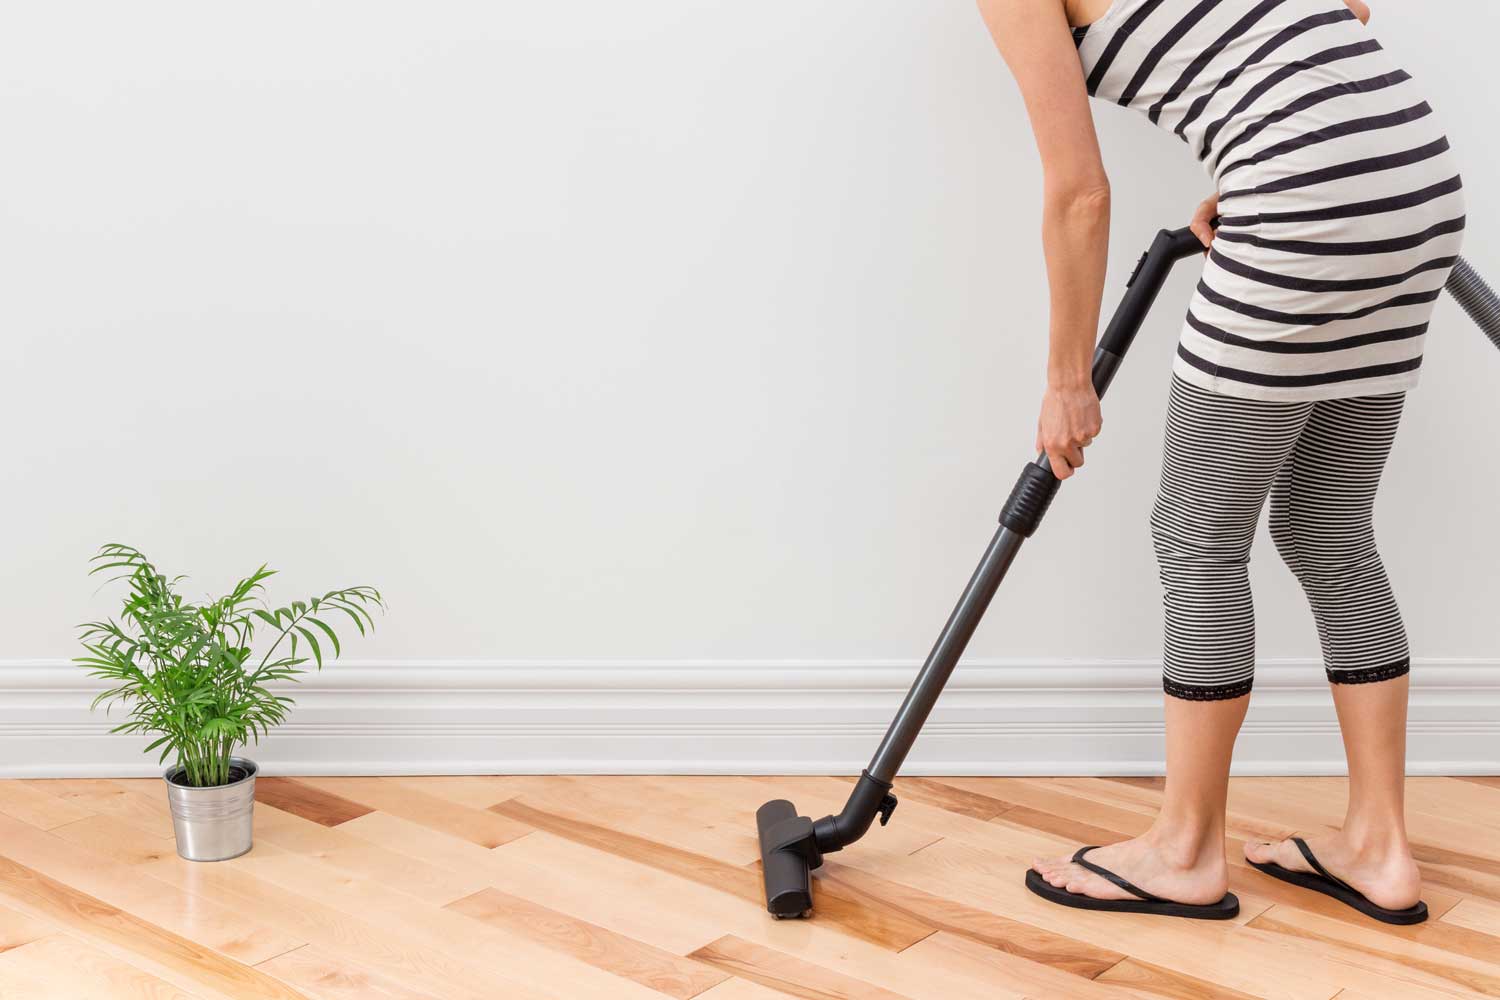 Regulary vacuum or sweep floors to remove dirt and keep your home floors looking amazing - tips from Footprints Floors in Omaha.